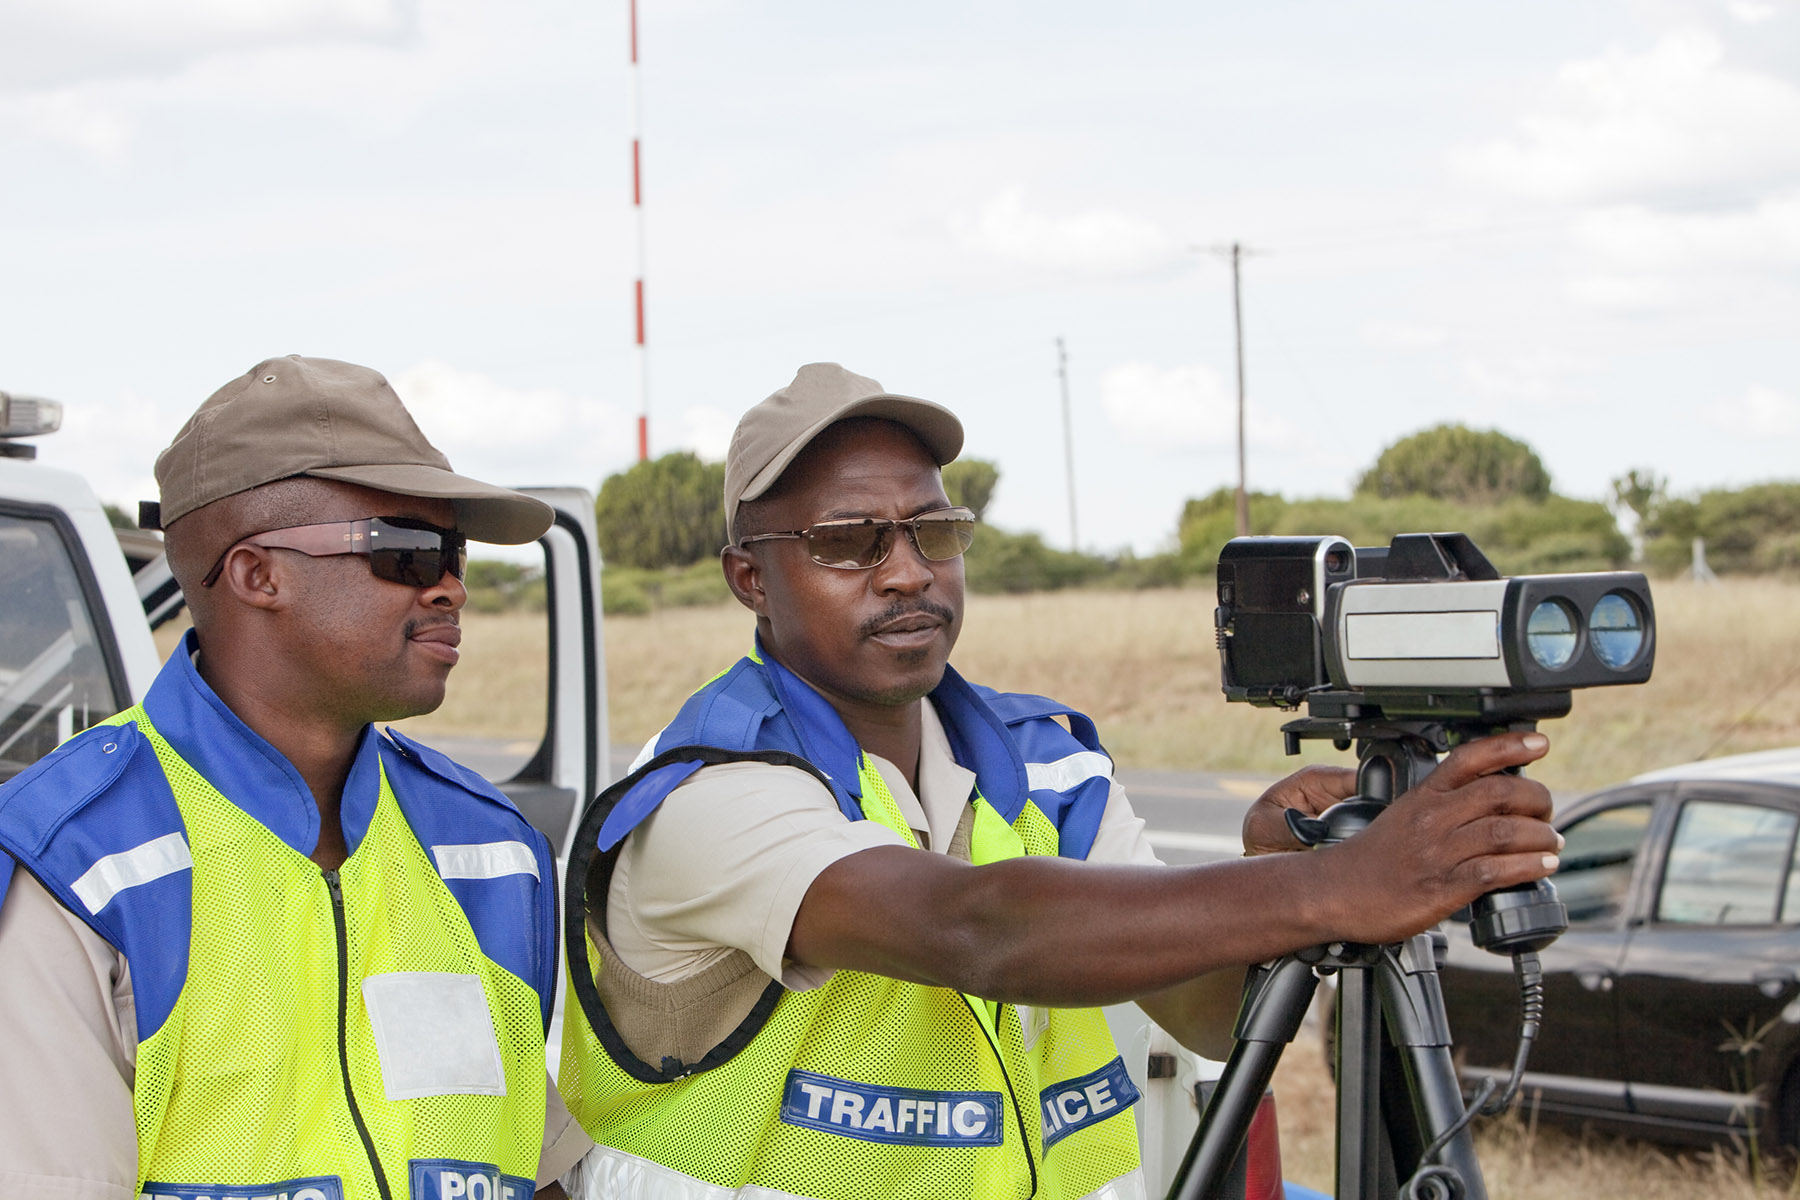 Traffic officers monitoring speed with a camera in South Africa